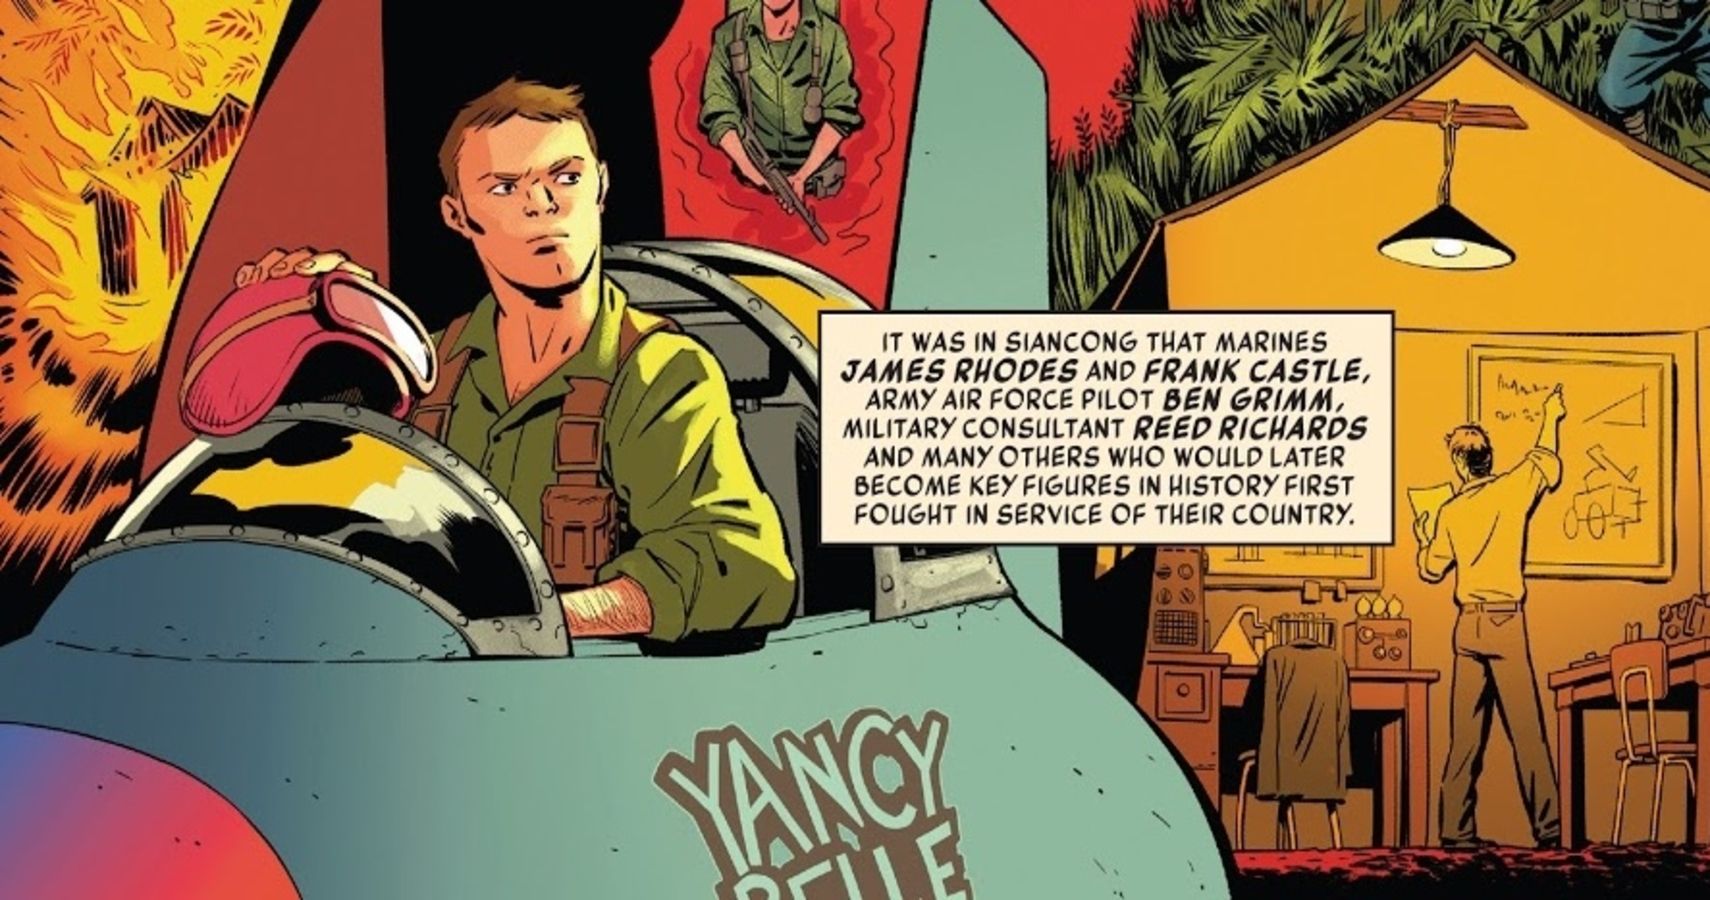 Air Force pilot Ben Grimm in plane and Reed Richards working military intelligence